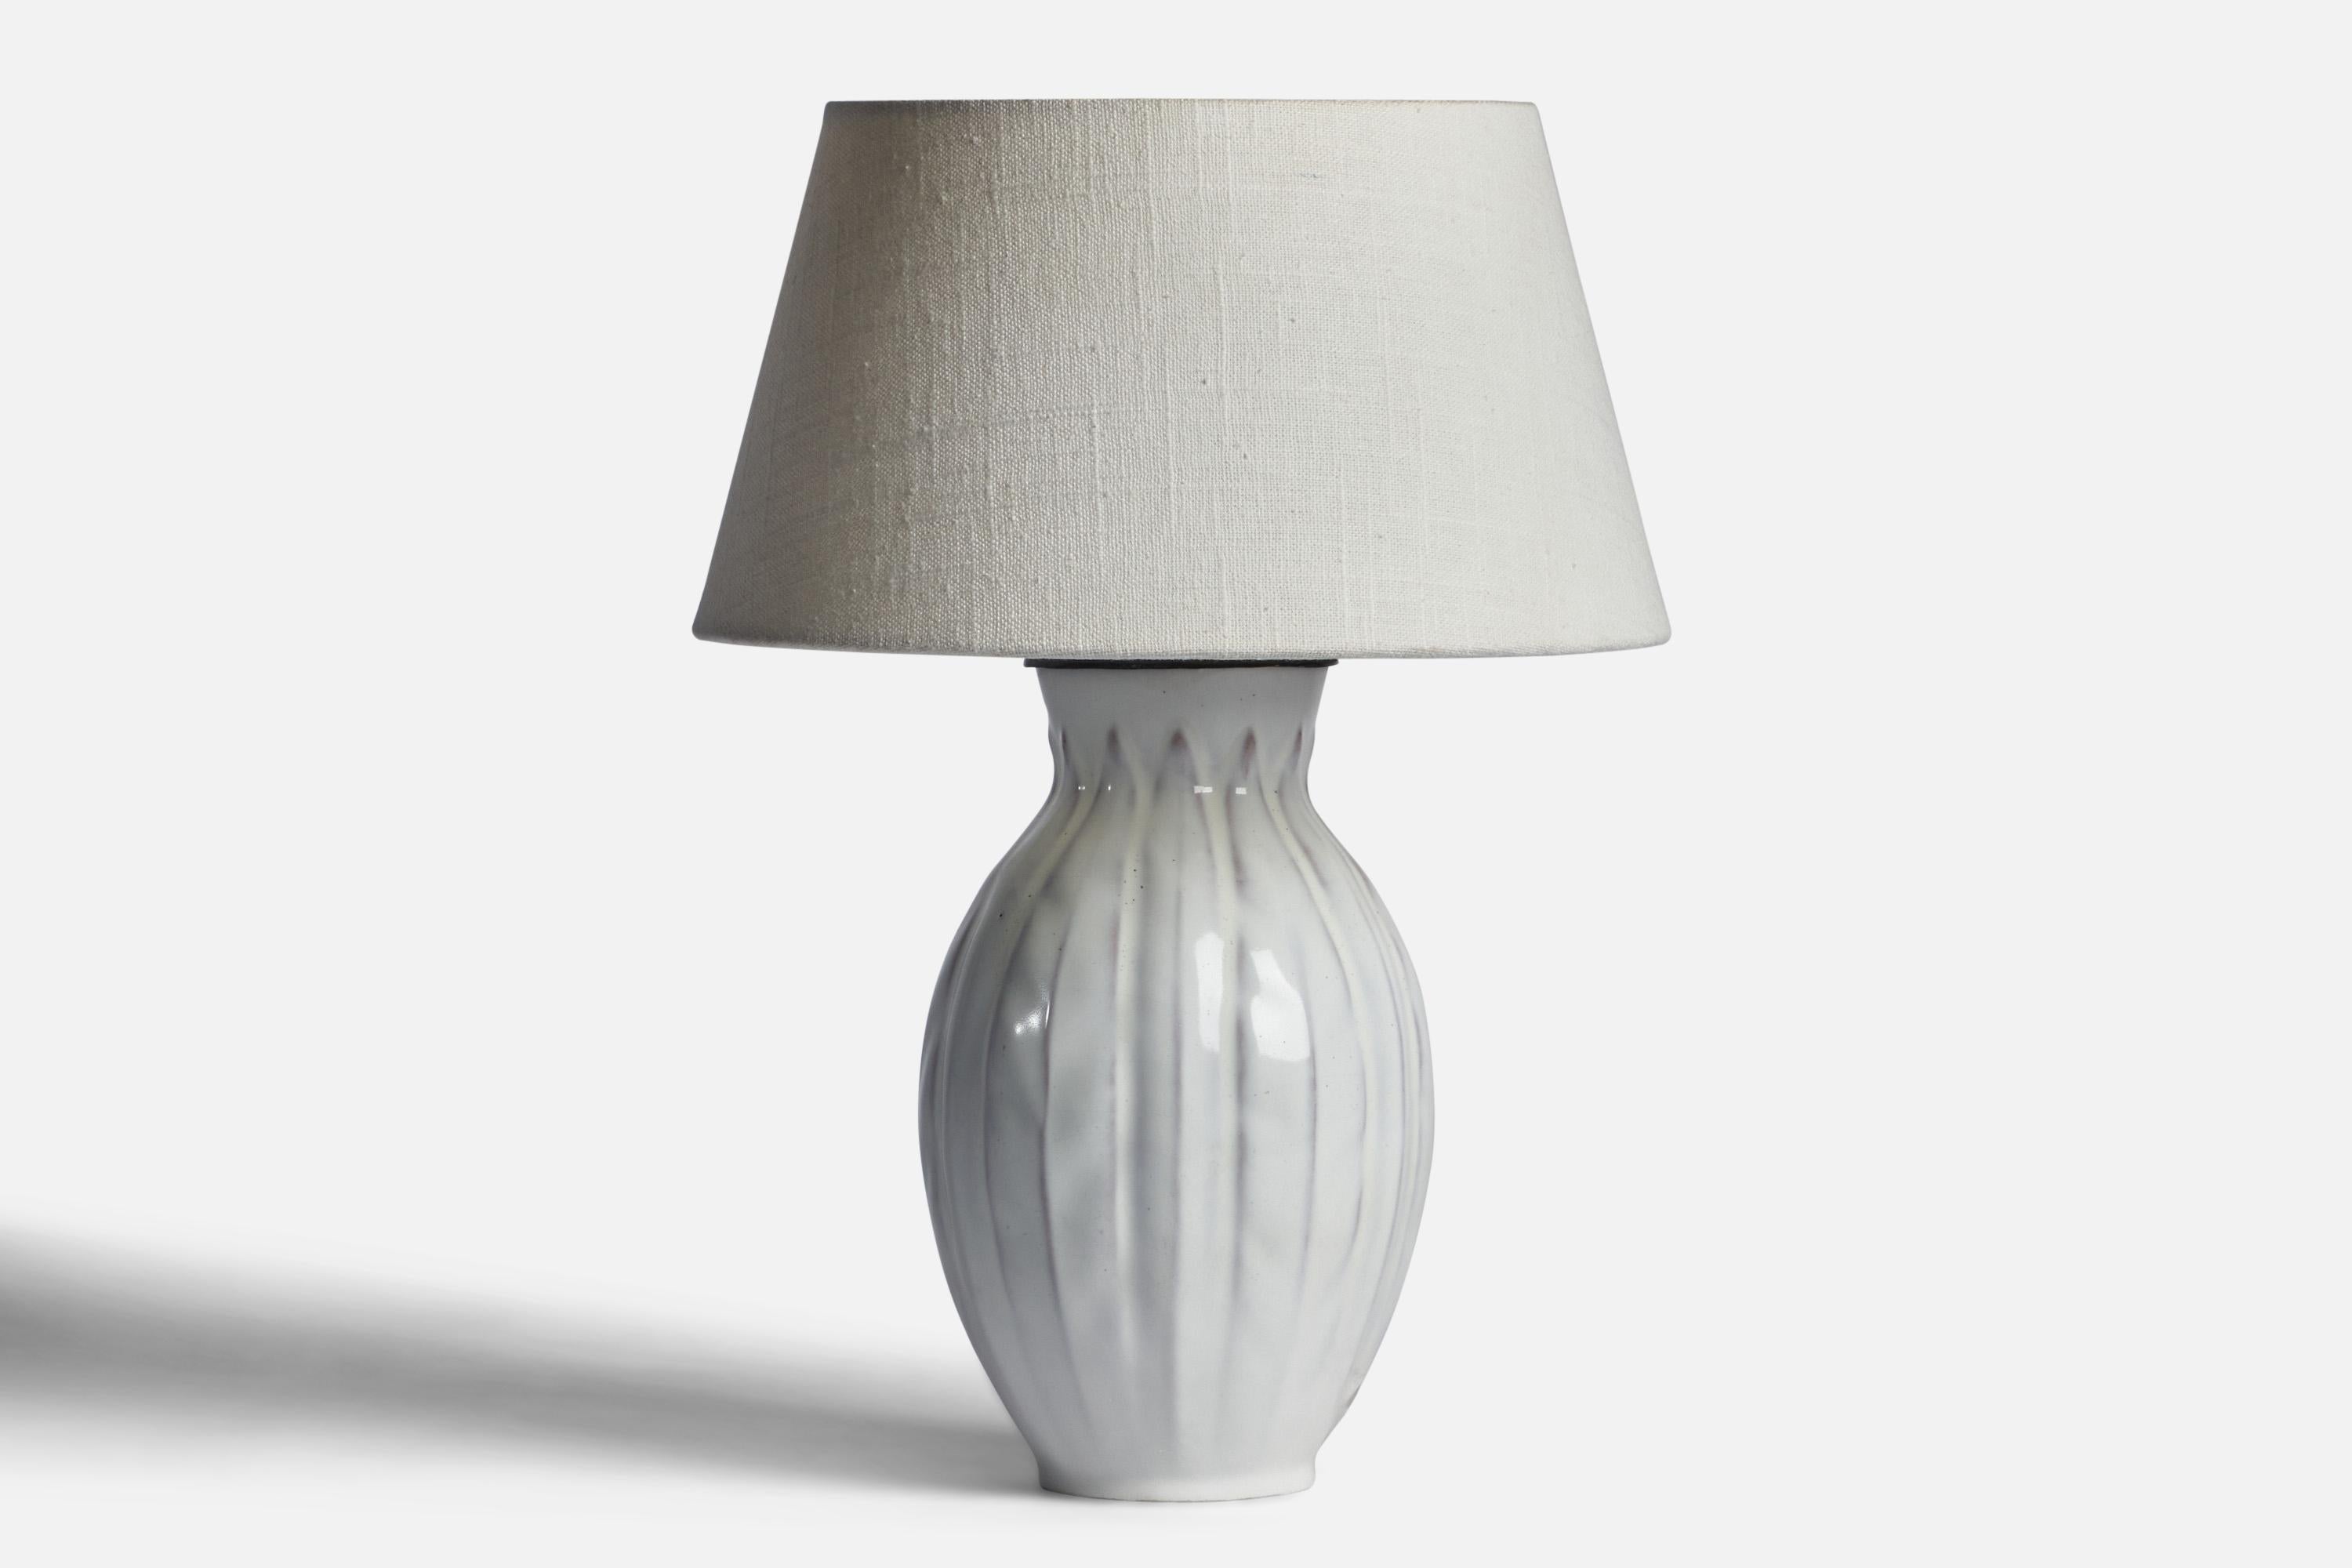 A white-glazed earthenware table lamp designed by Anna-Lisa Thomson and produced by Upsala Ekeby, Sweden, 1930s.

Dimensions of Lamp (inches): 11.15” H x 5.2” Diameter
Dimensions of Shade (inches): 7” Top Diameter x 10” Bottom Diameter x 5.5” H